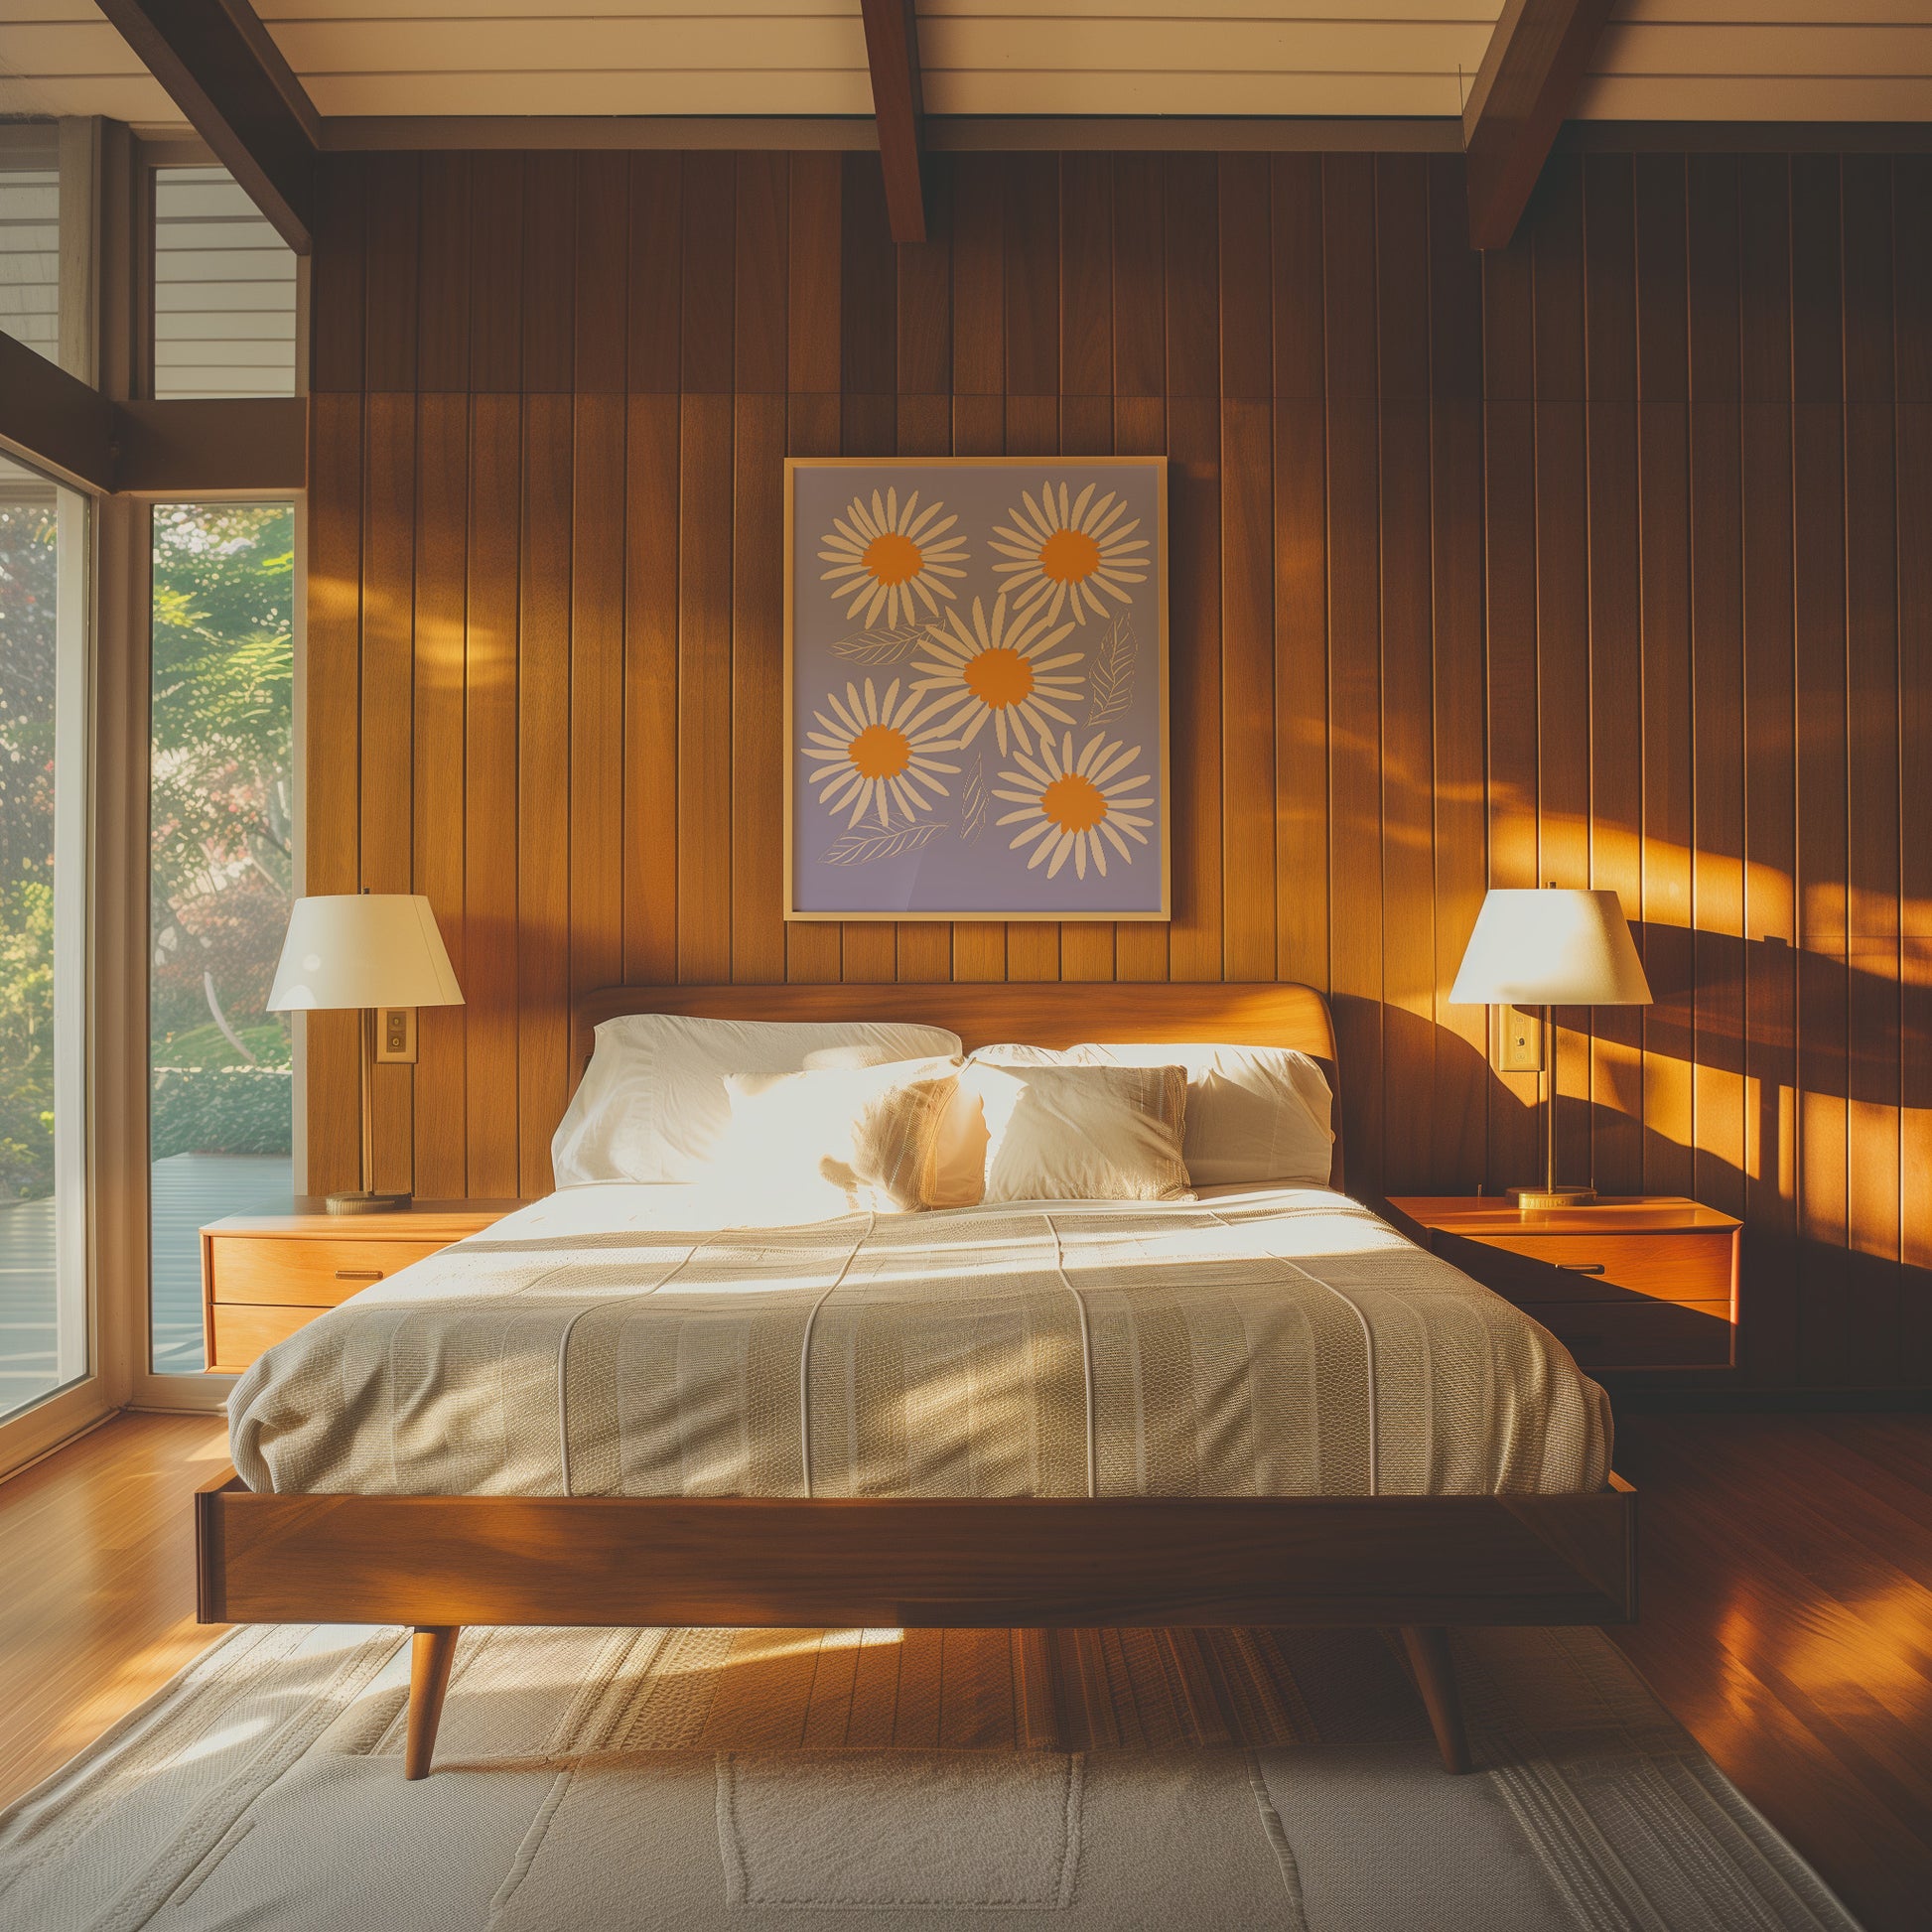 Cozy bedroom with warm lighting, a large bed, wooden walls, and artwork above the bed.